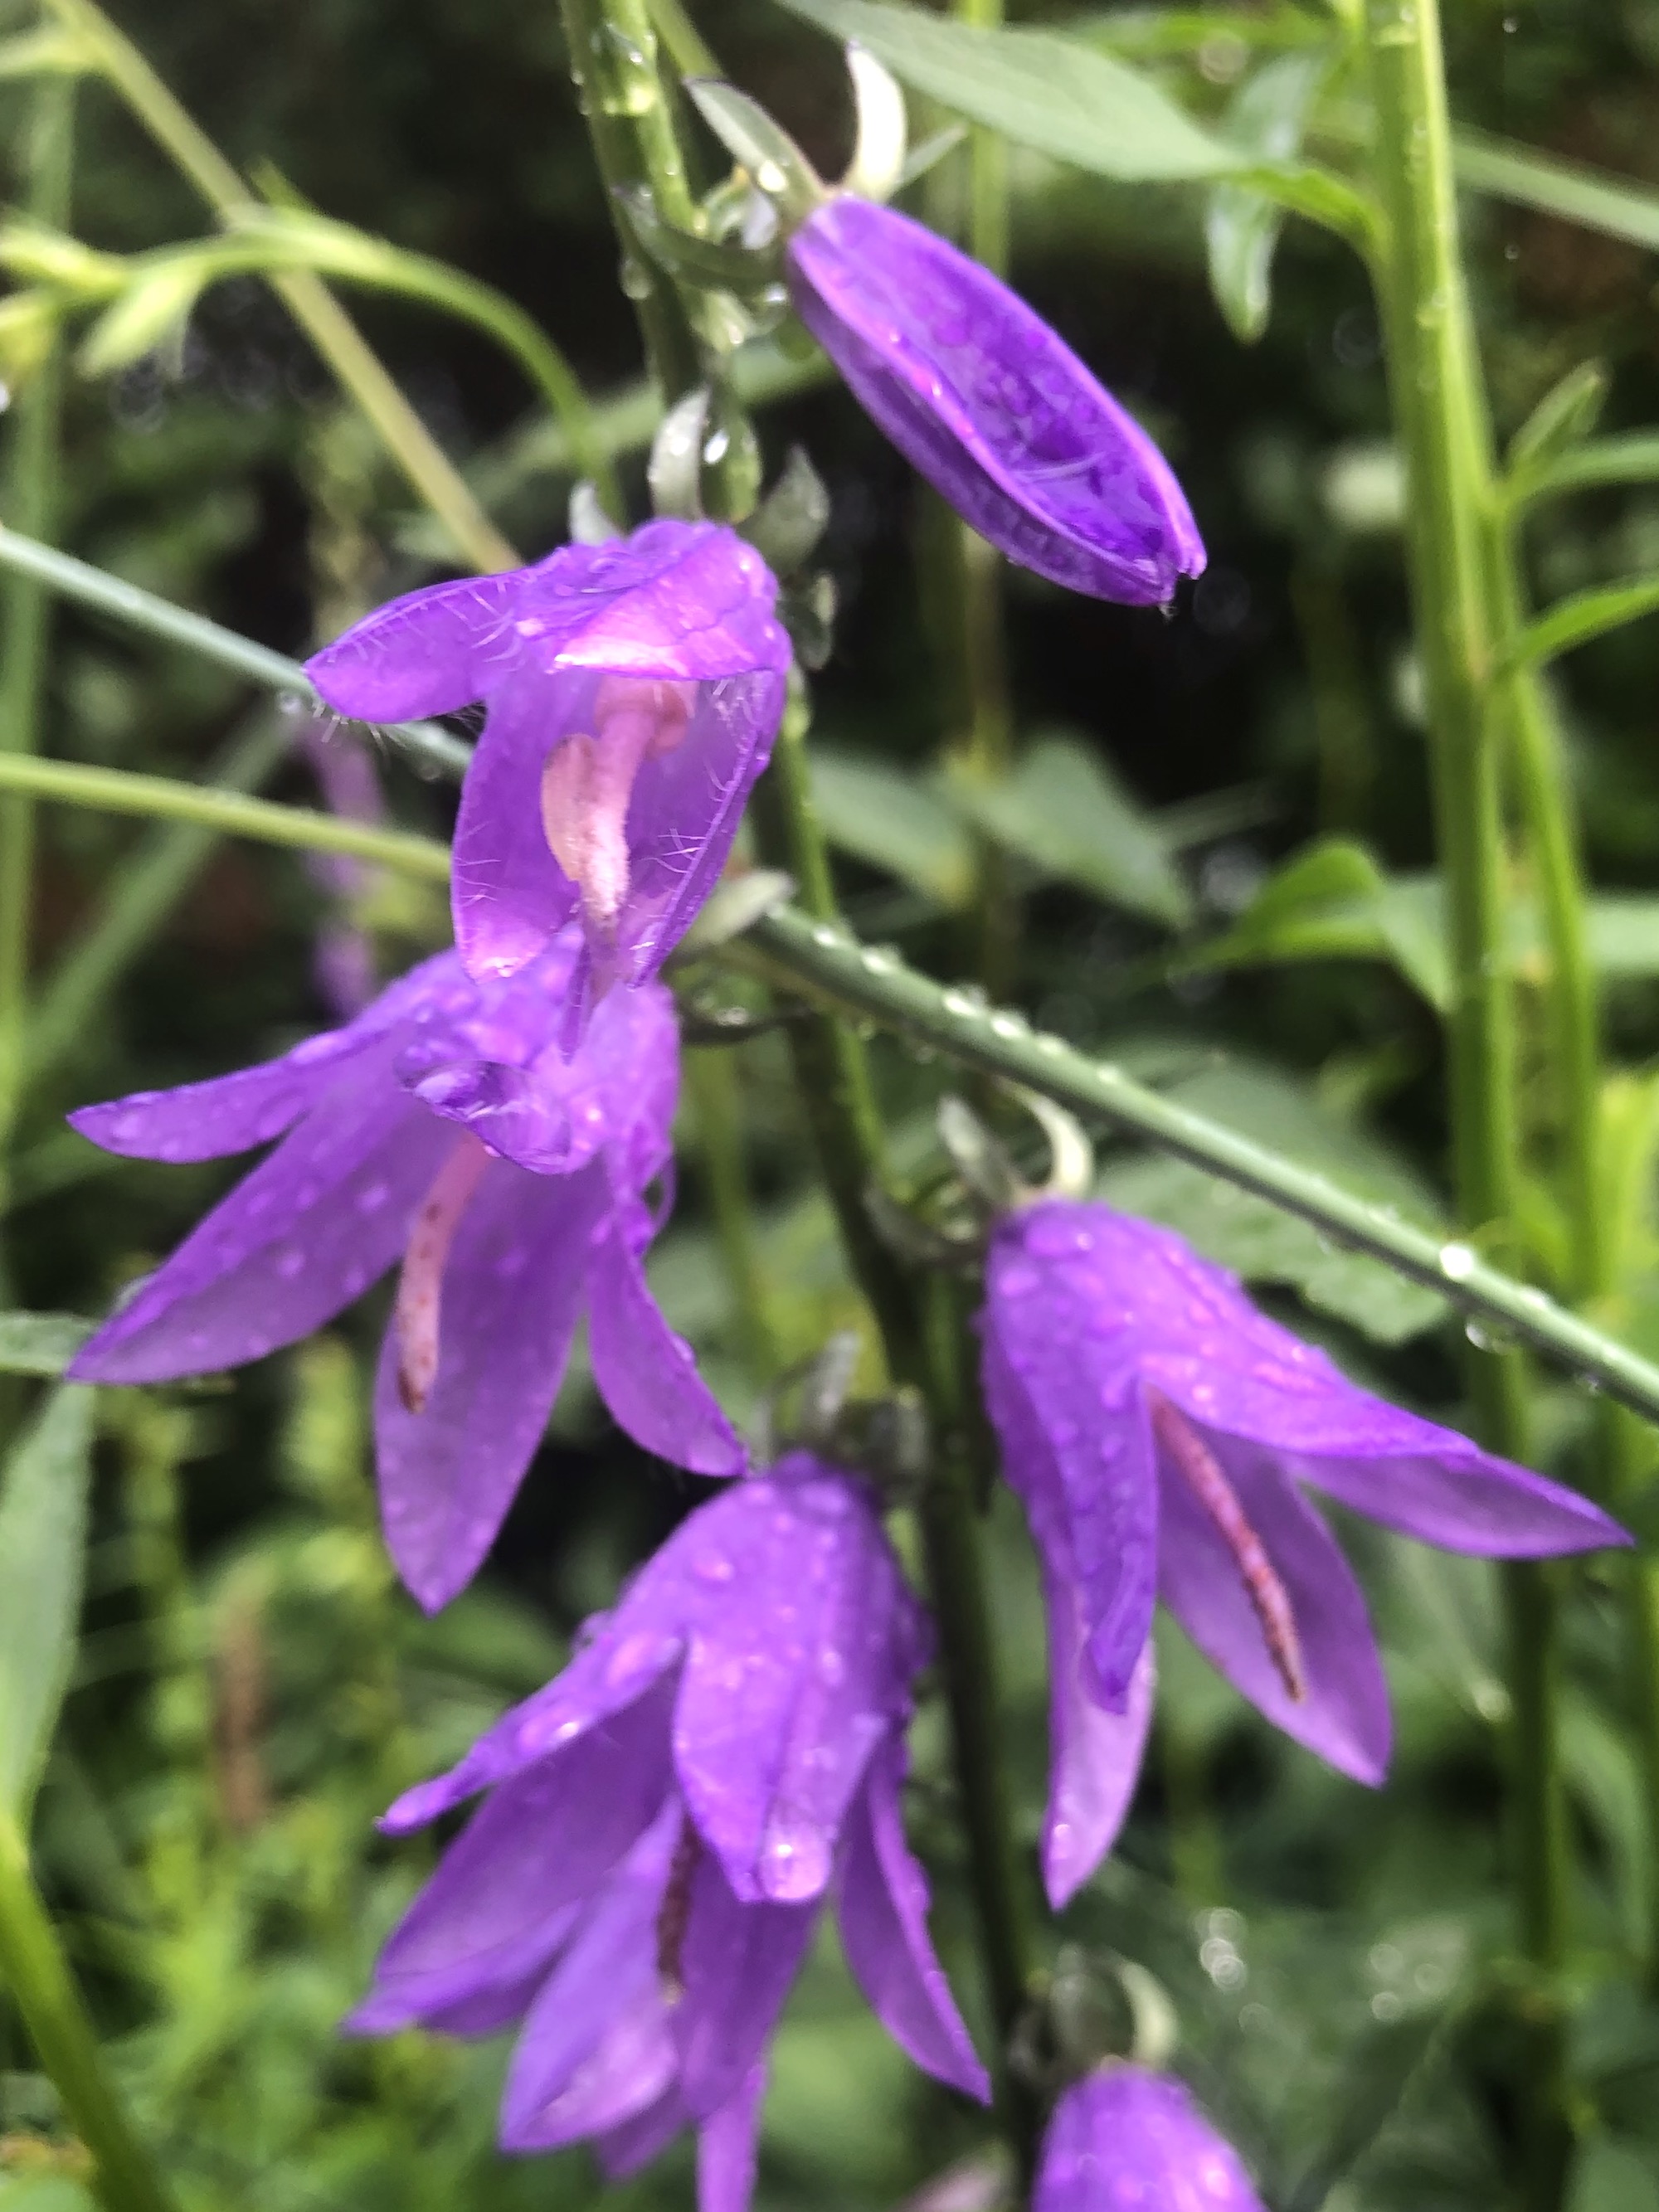 Creeping Bellflower on Manitou Way in Madison, Wisconsin on June 26, 2020.